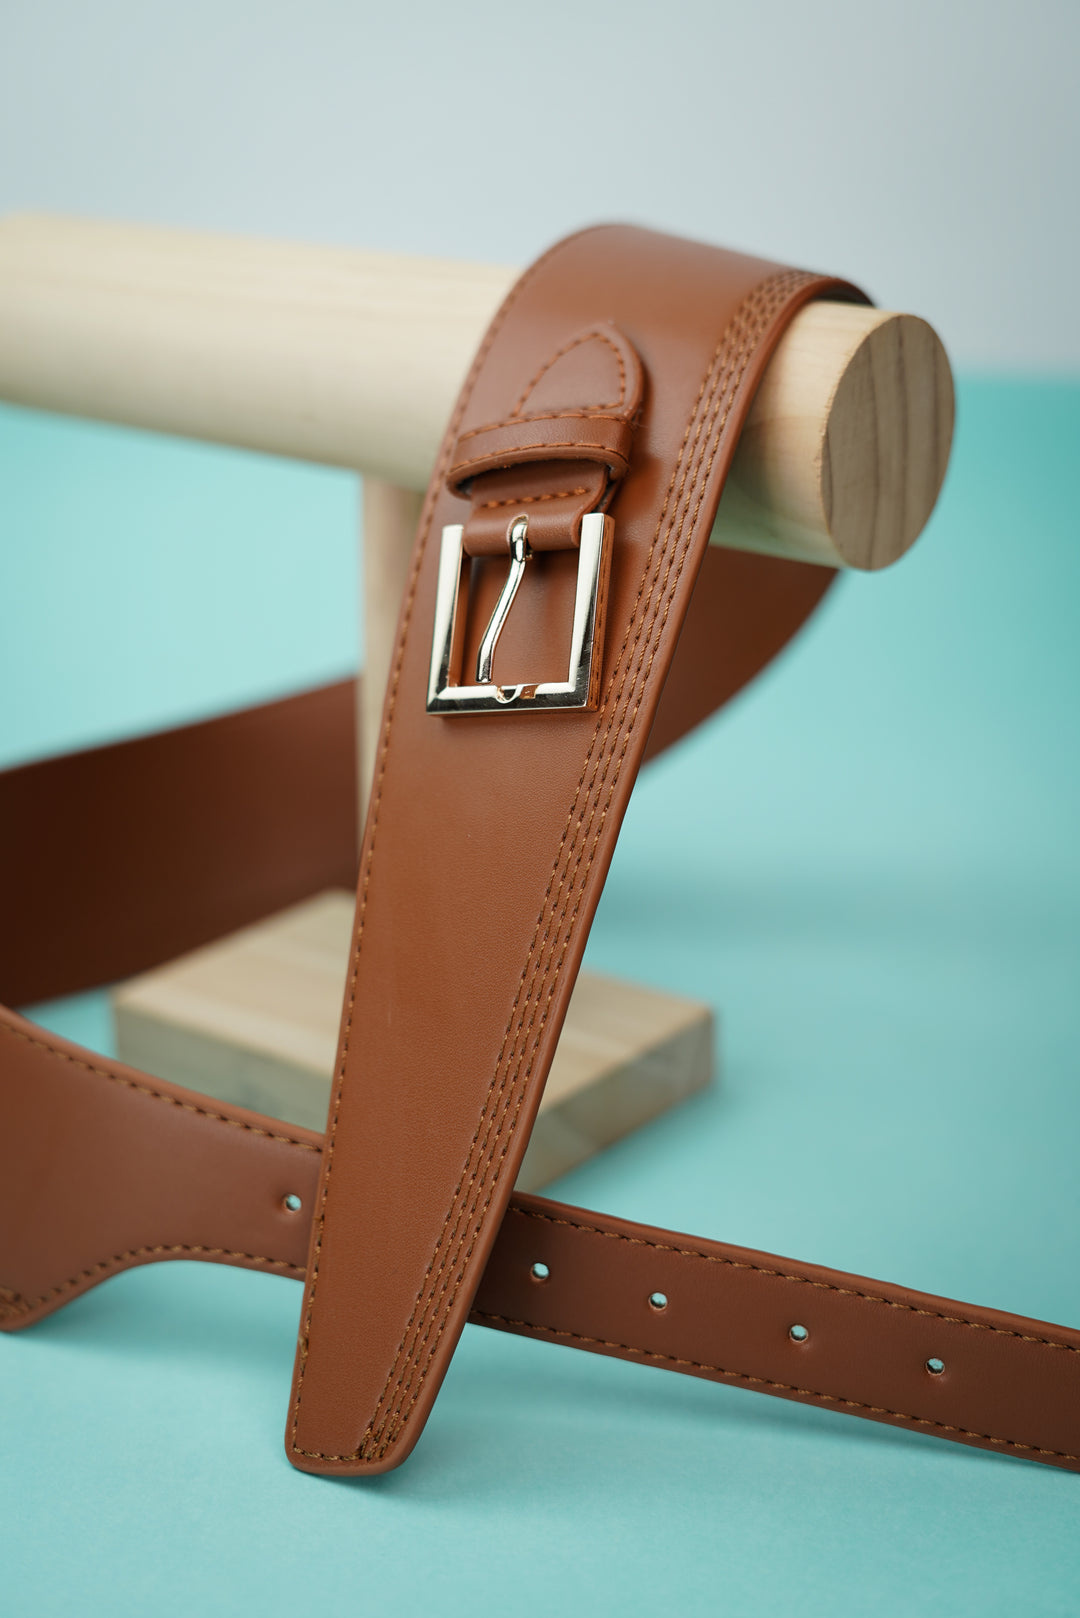 Versatile leather belt for different events and occasions